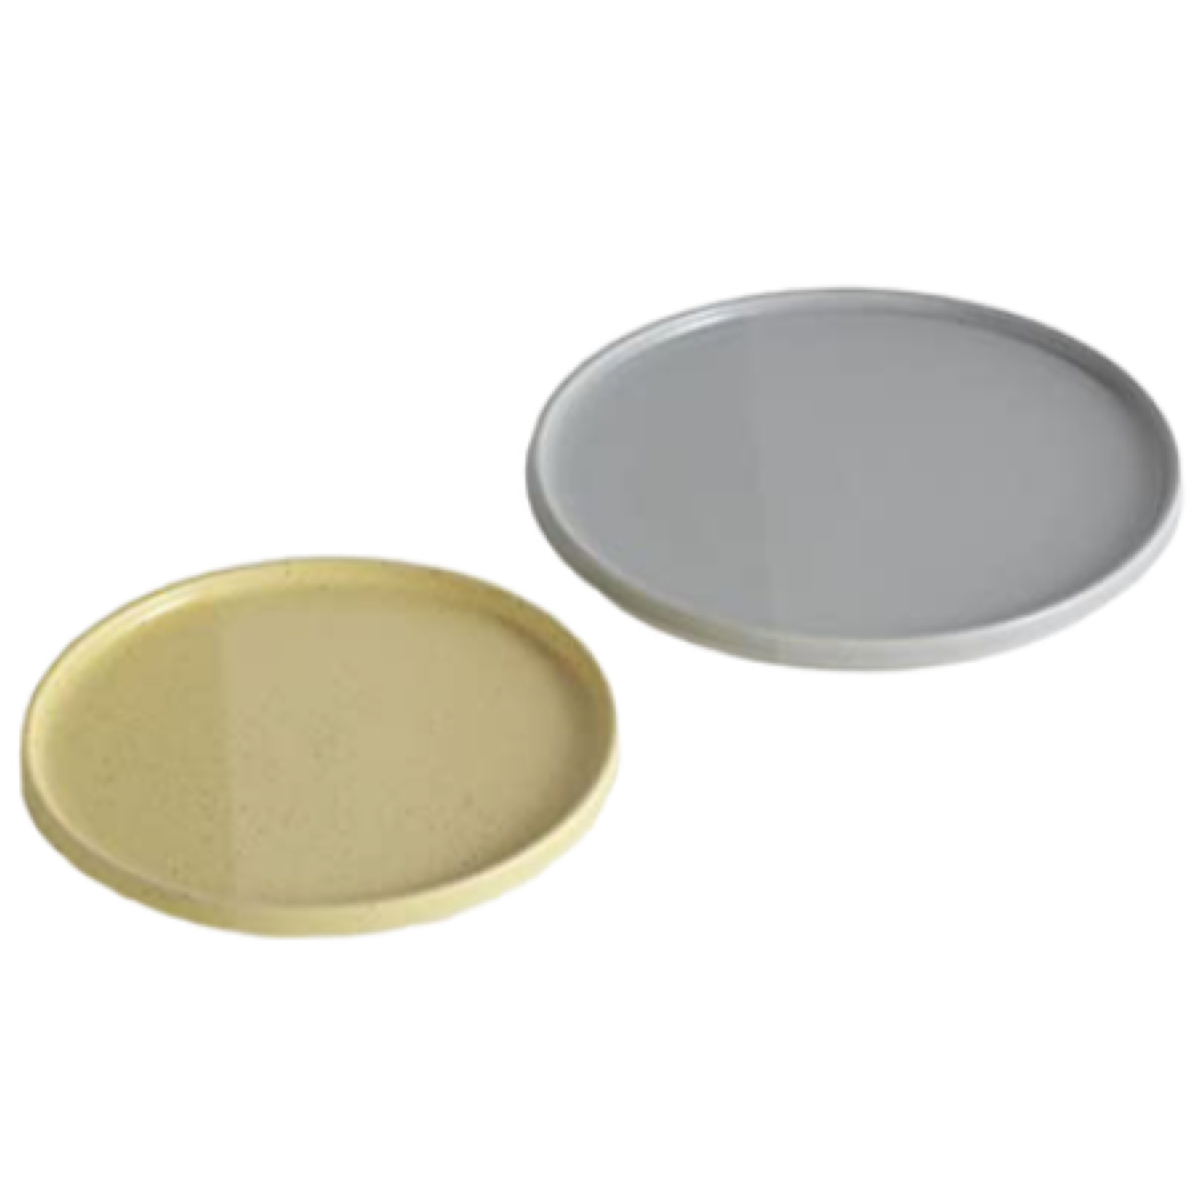 SEDIMENT PLATES by Os & Oos